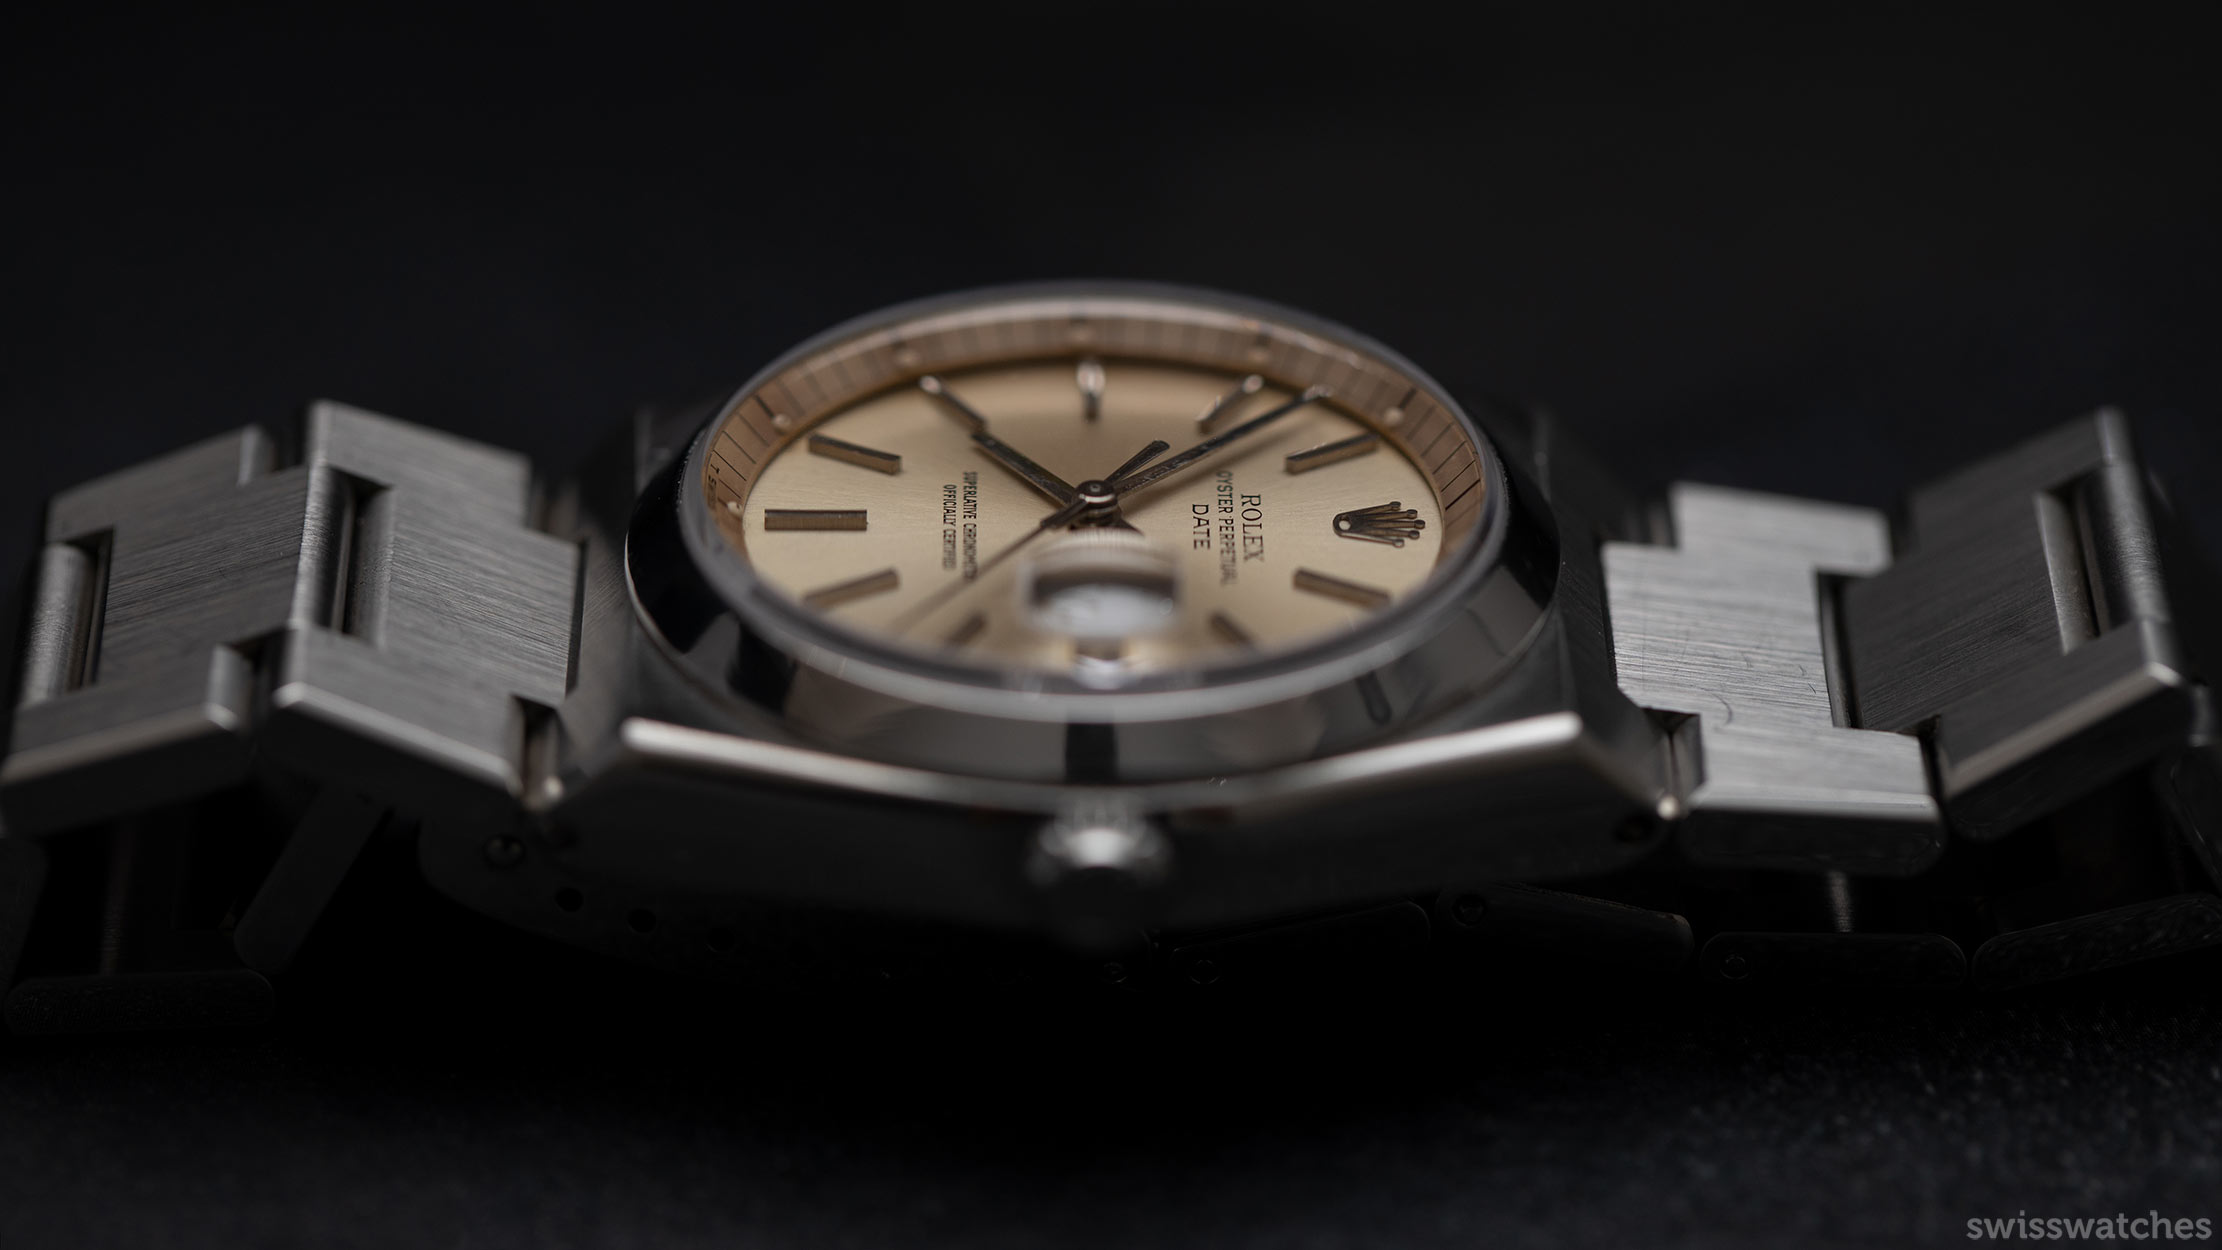 The Curious Tale Of The ROLEX 1530: An Automatic Movement In A Quartz | Swisswatches Magazine